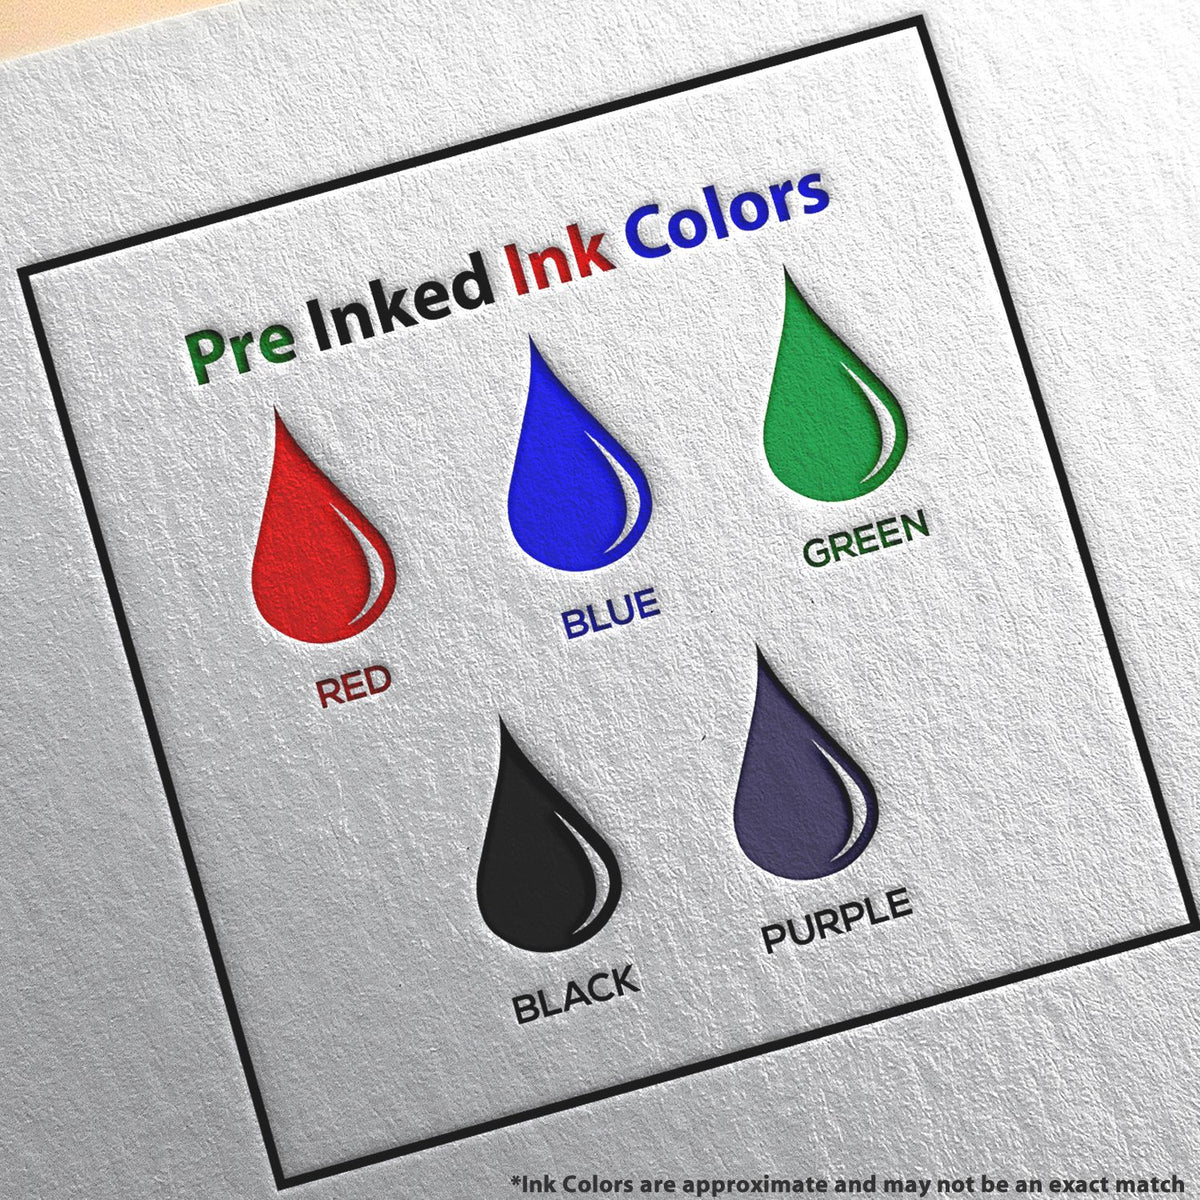 A picture showing the different ink colors or hues available for the Super Slim West Virginia Notary Public Stamp product.